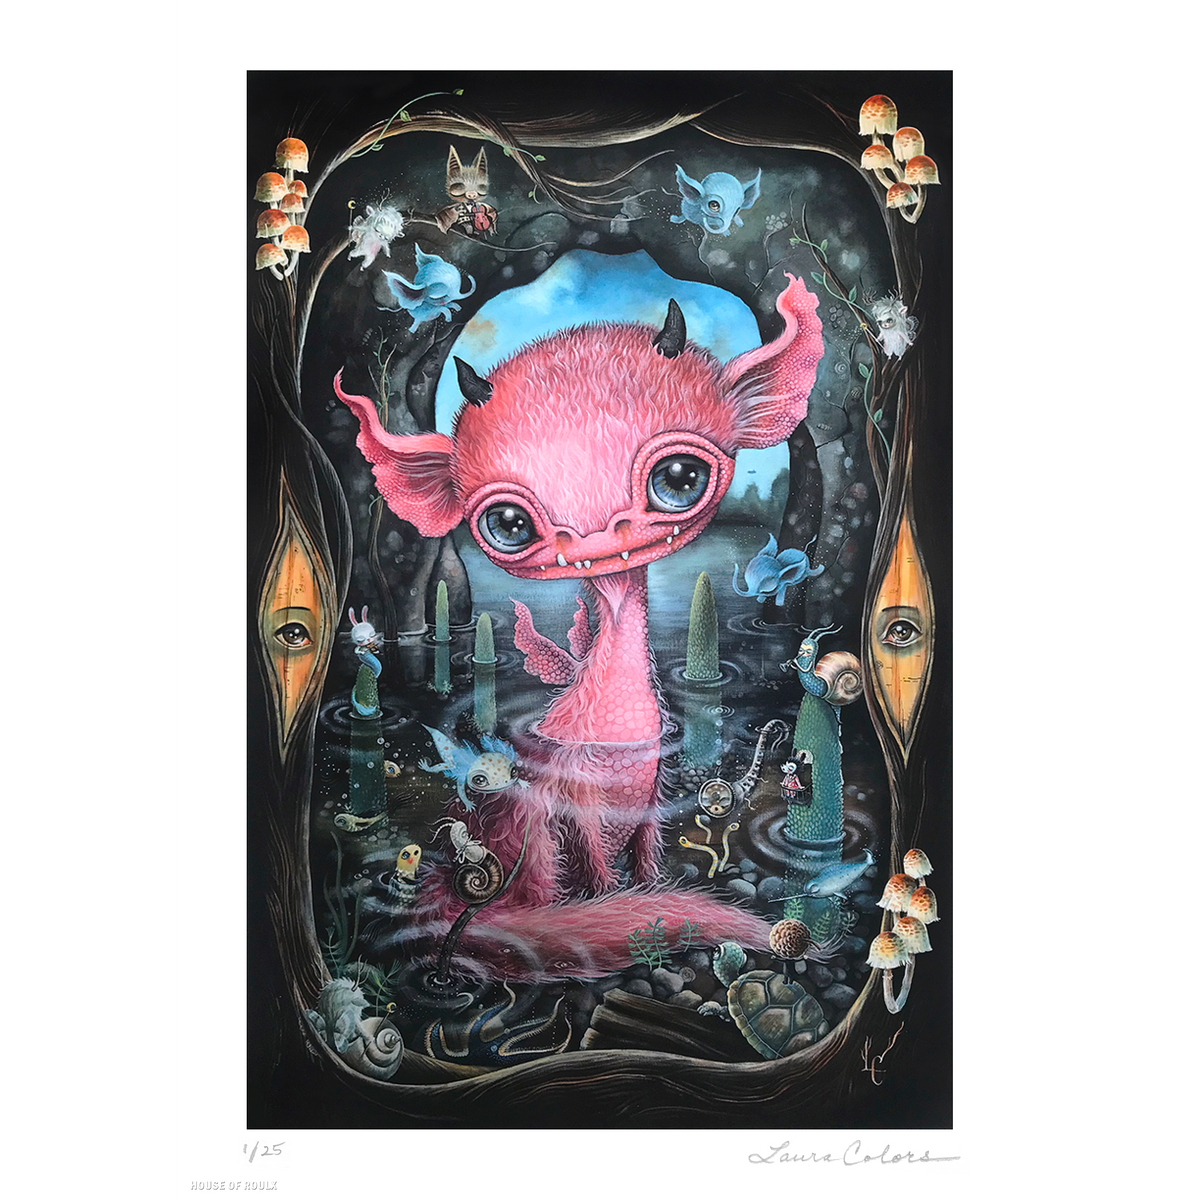 Laura Colors &quot;Curious Beast&quot; - Archival Print, Limited Edition of 25 - 12 x 17&quot;